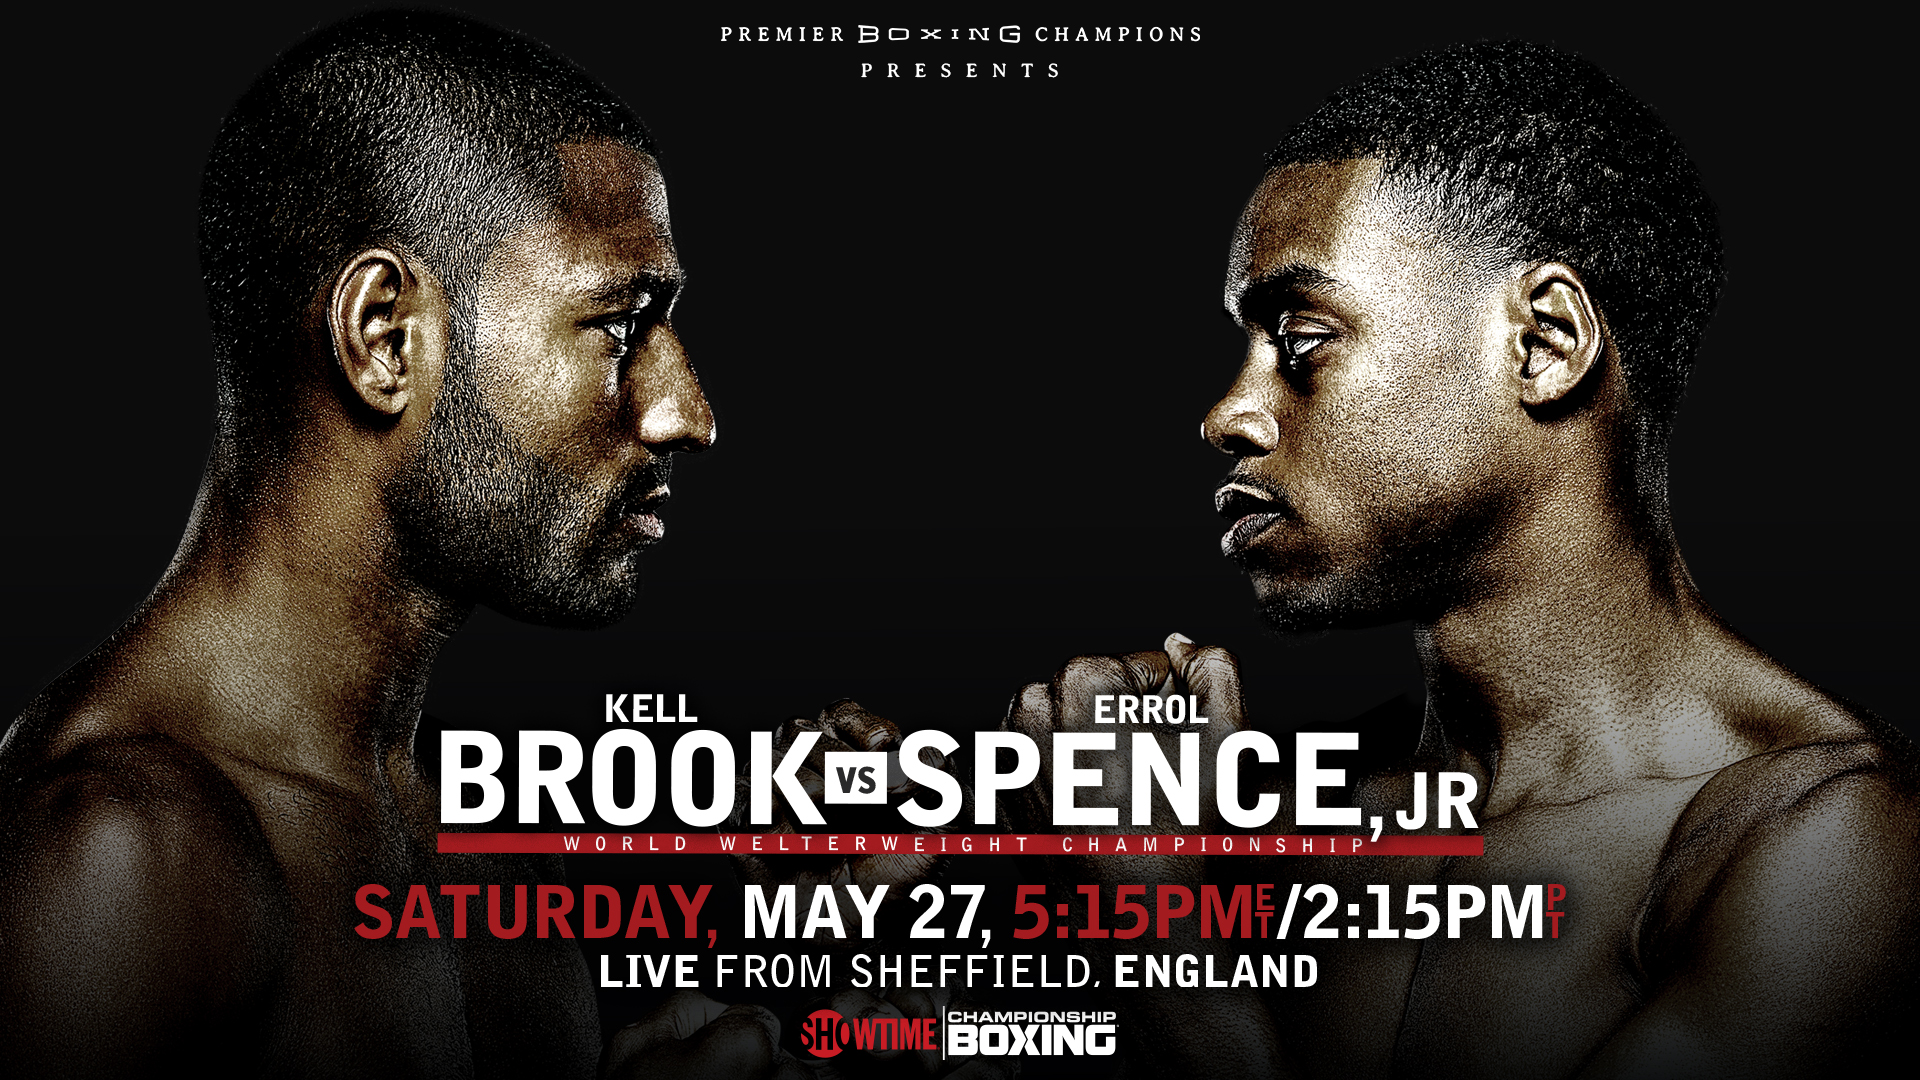 Errol Spence out to build his legacy vs. Kell Brook1920 x 1080